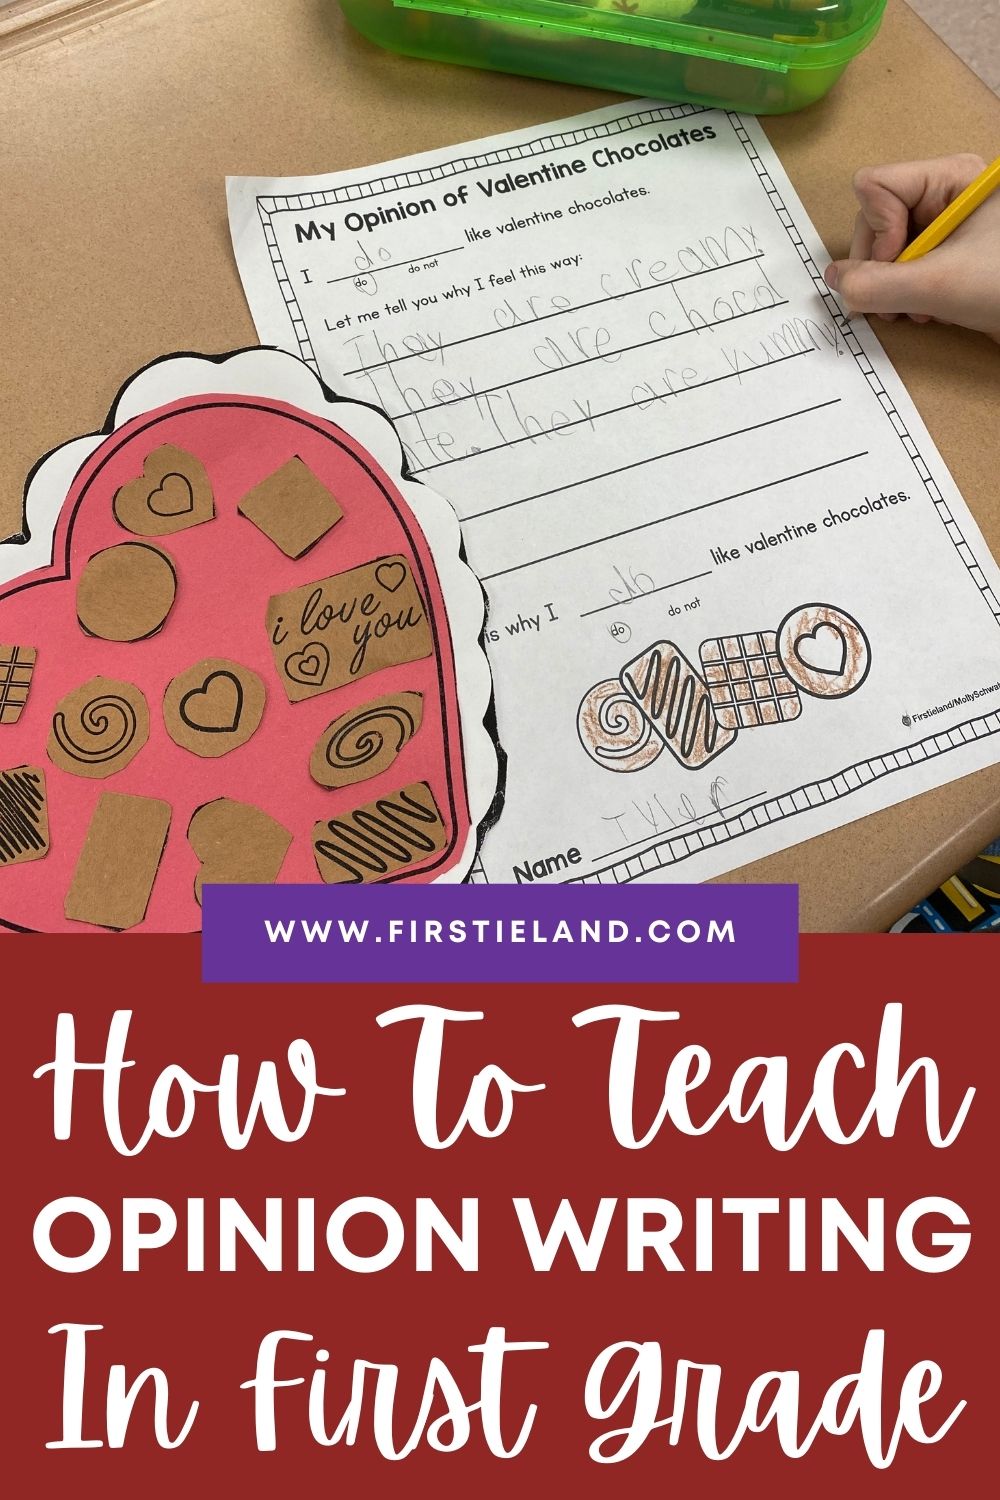 how-to-teach-opinion-writing-in-first-grade-firstieland-first-grade